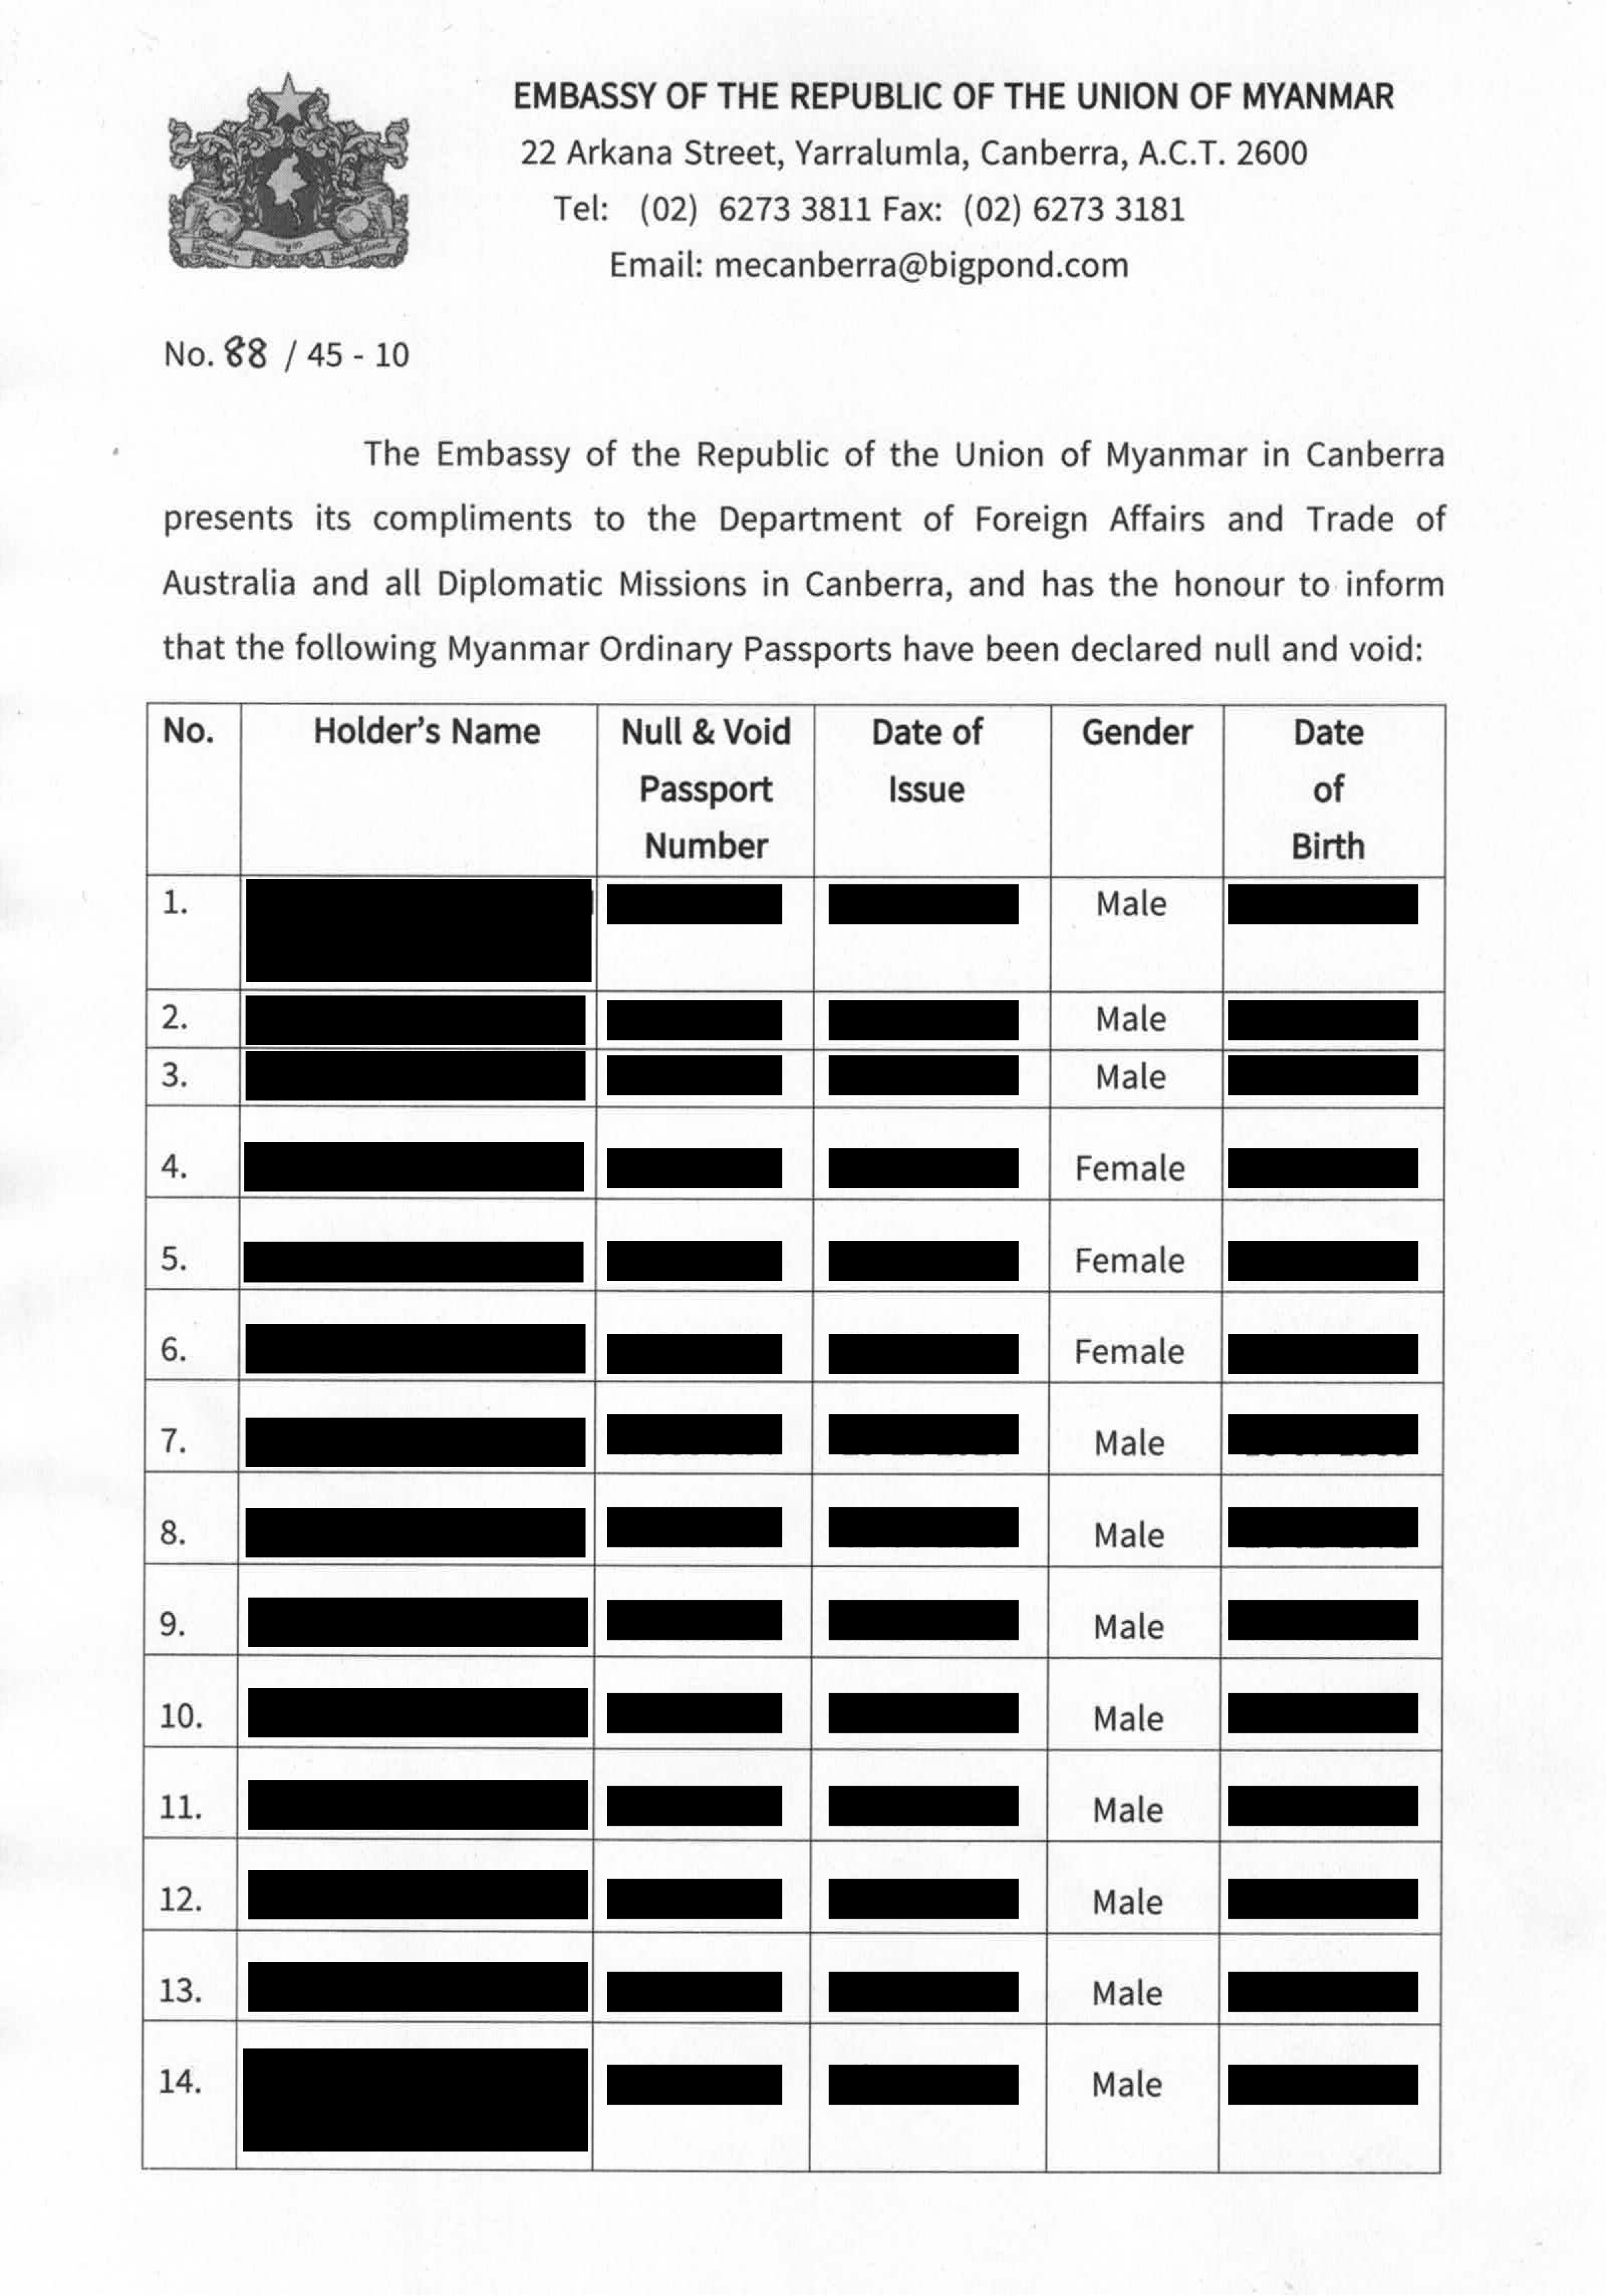 An official document showing a list of Burmese names and redacted details.